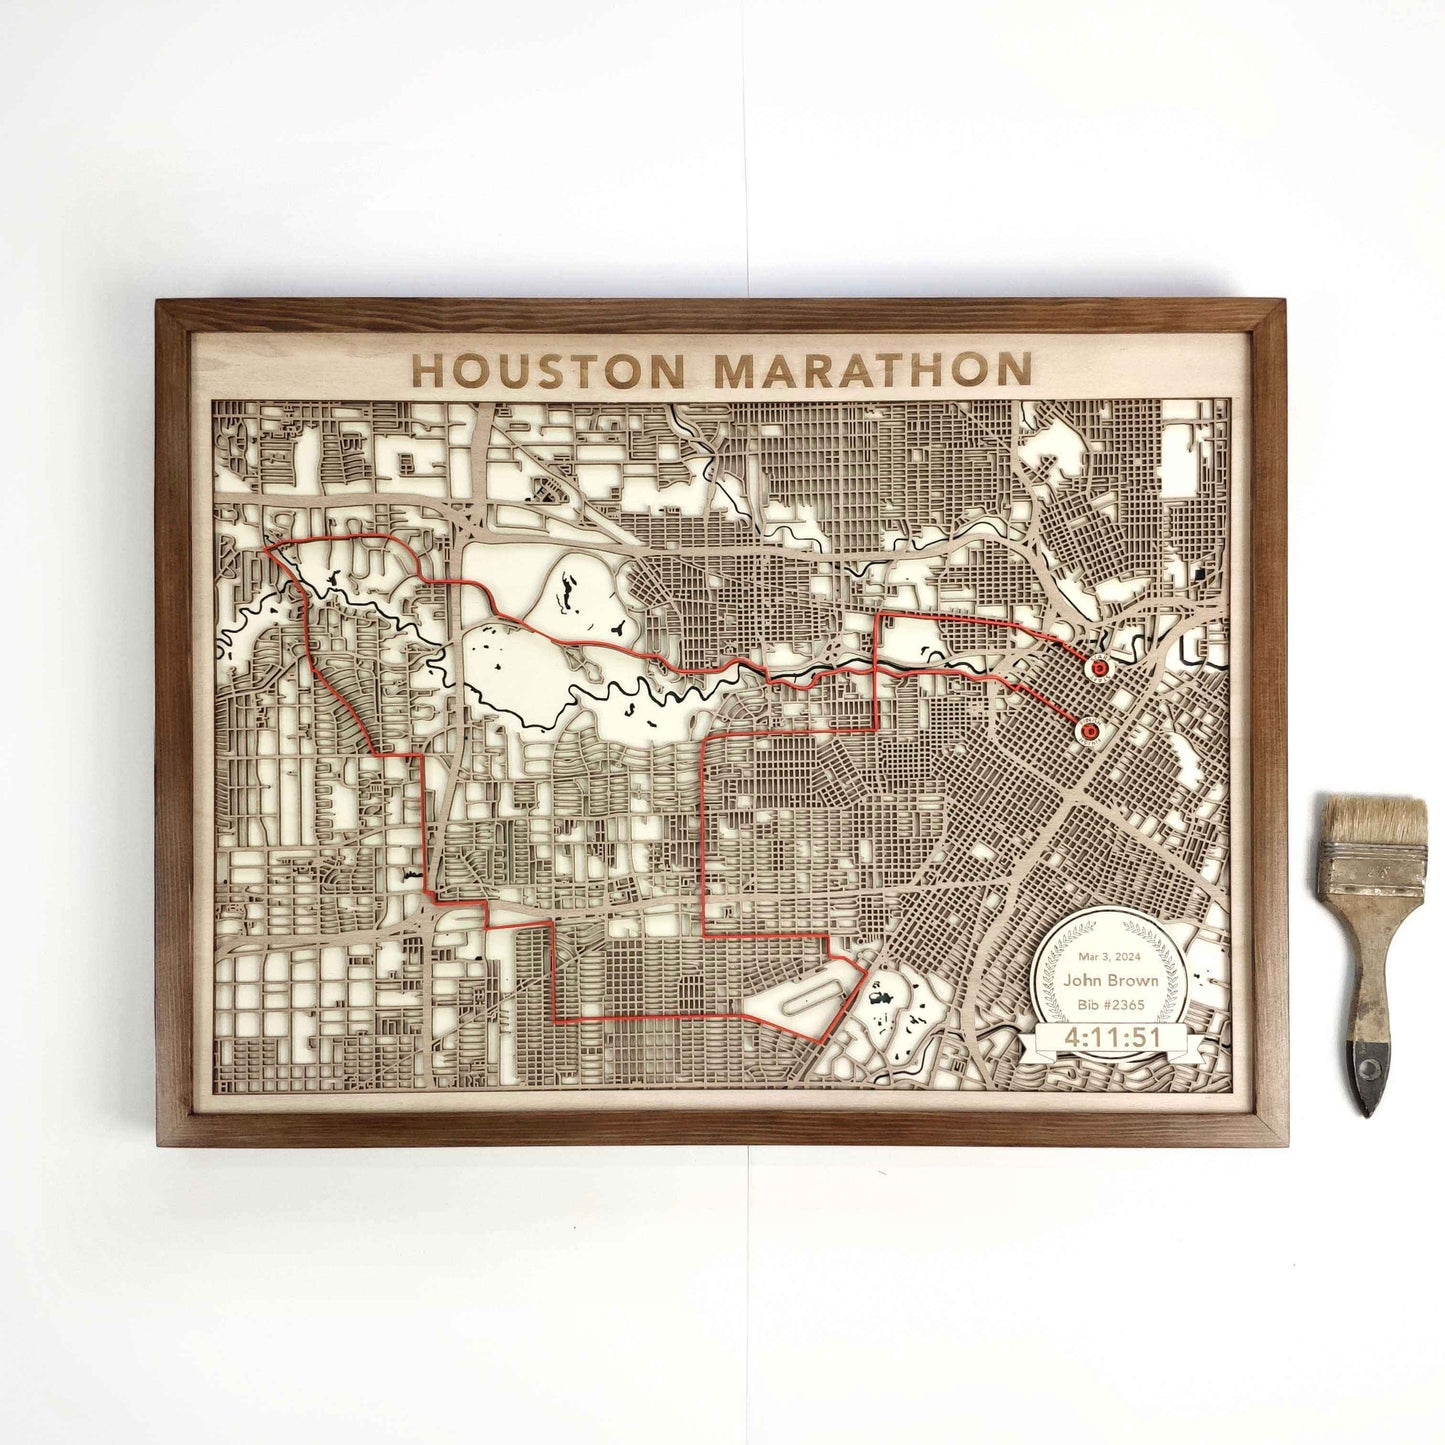 Houston Marathon Commemorative Wooden Route Map – Collector's Item by CityWood - Custom Wood Map Art - Unique Laser Cut Engraved - Anniversary Gift